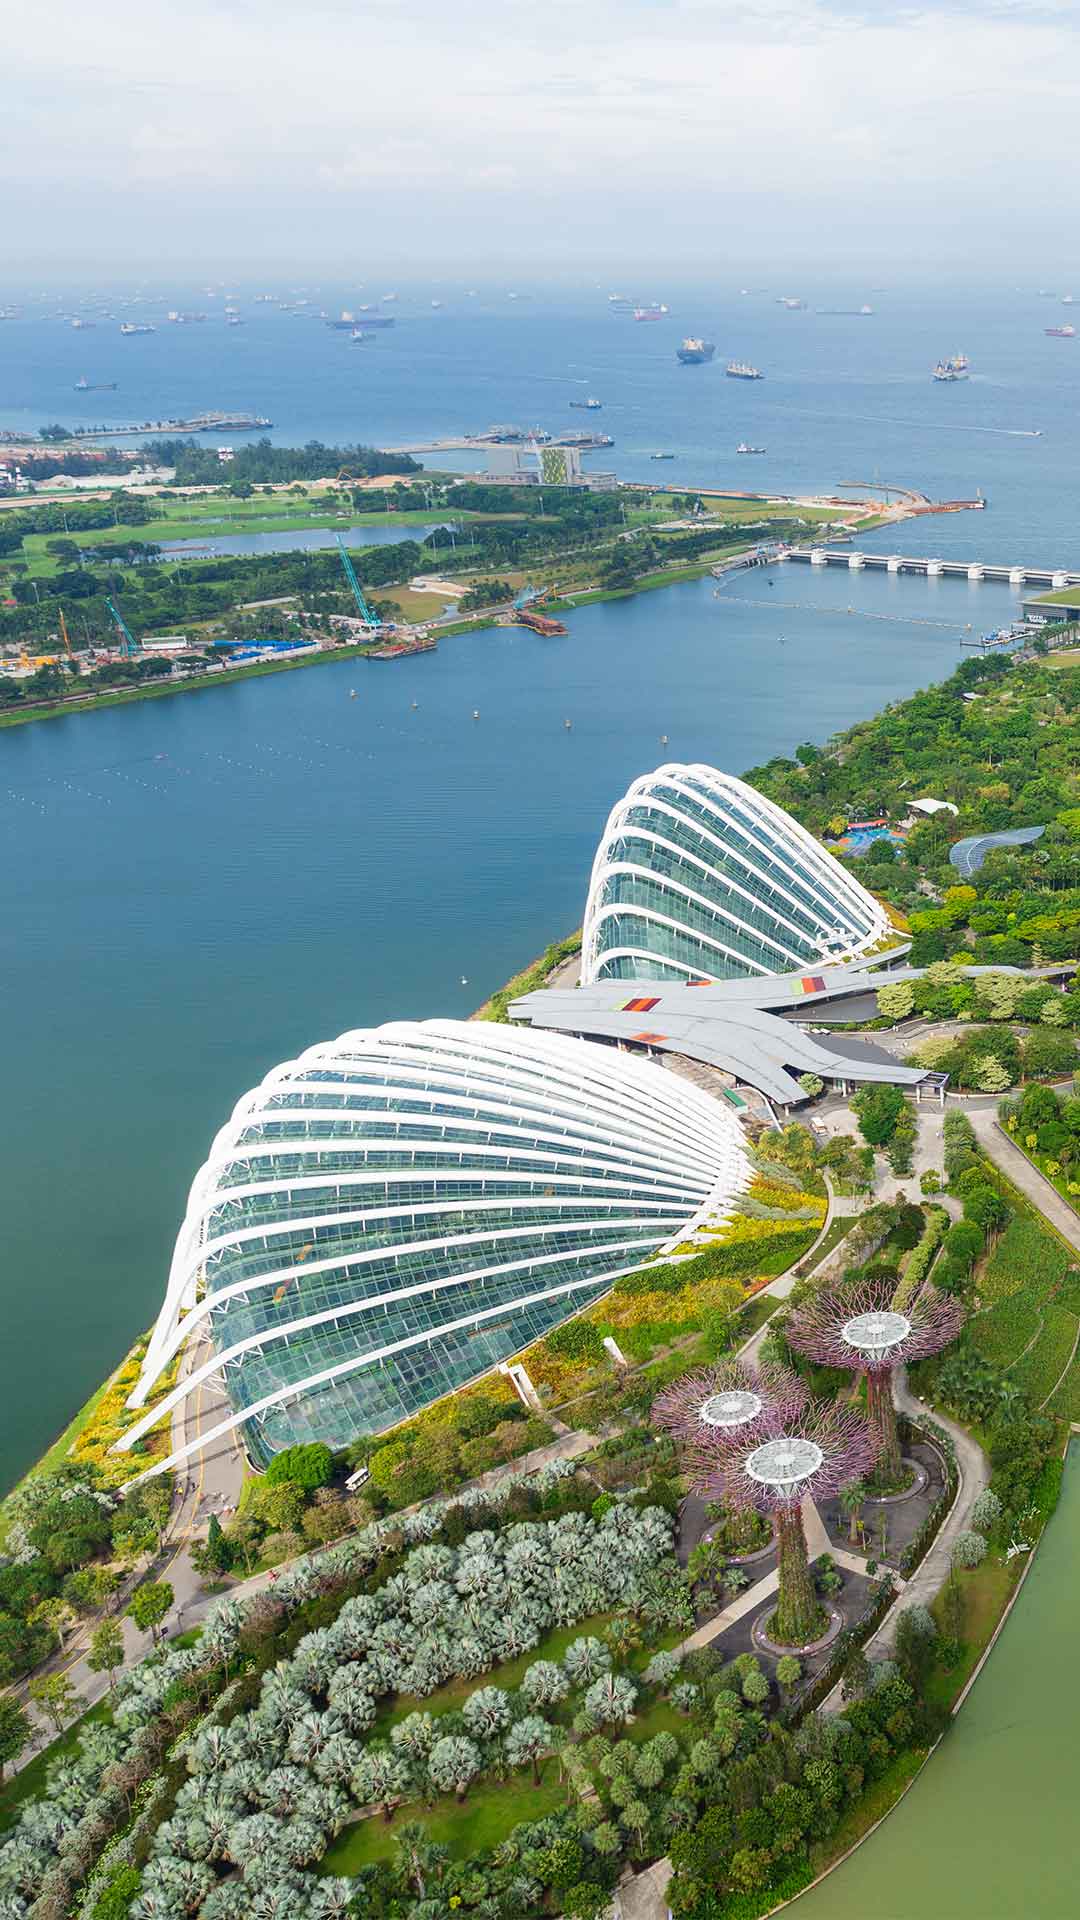 Top view of the domes at Gardens by the Bay in Singapore, near Marina Bay Sands